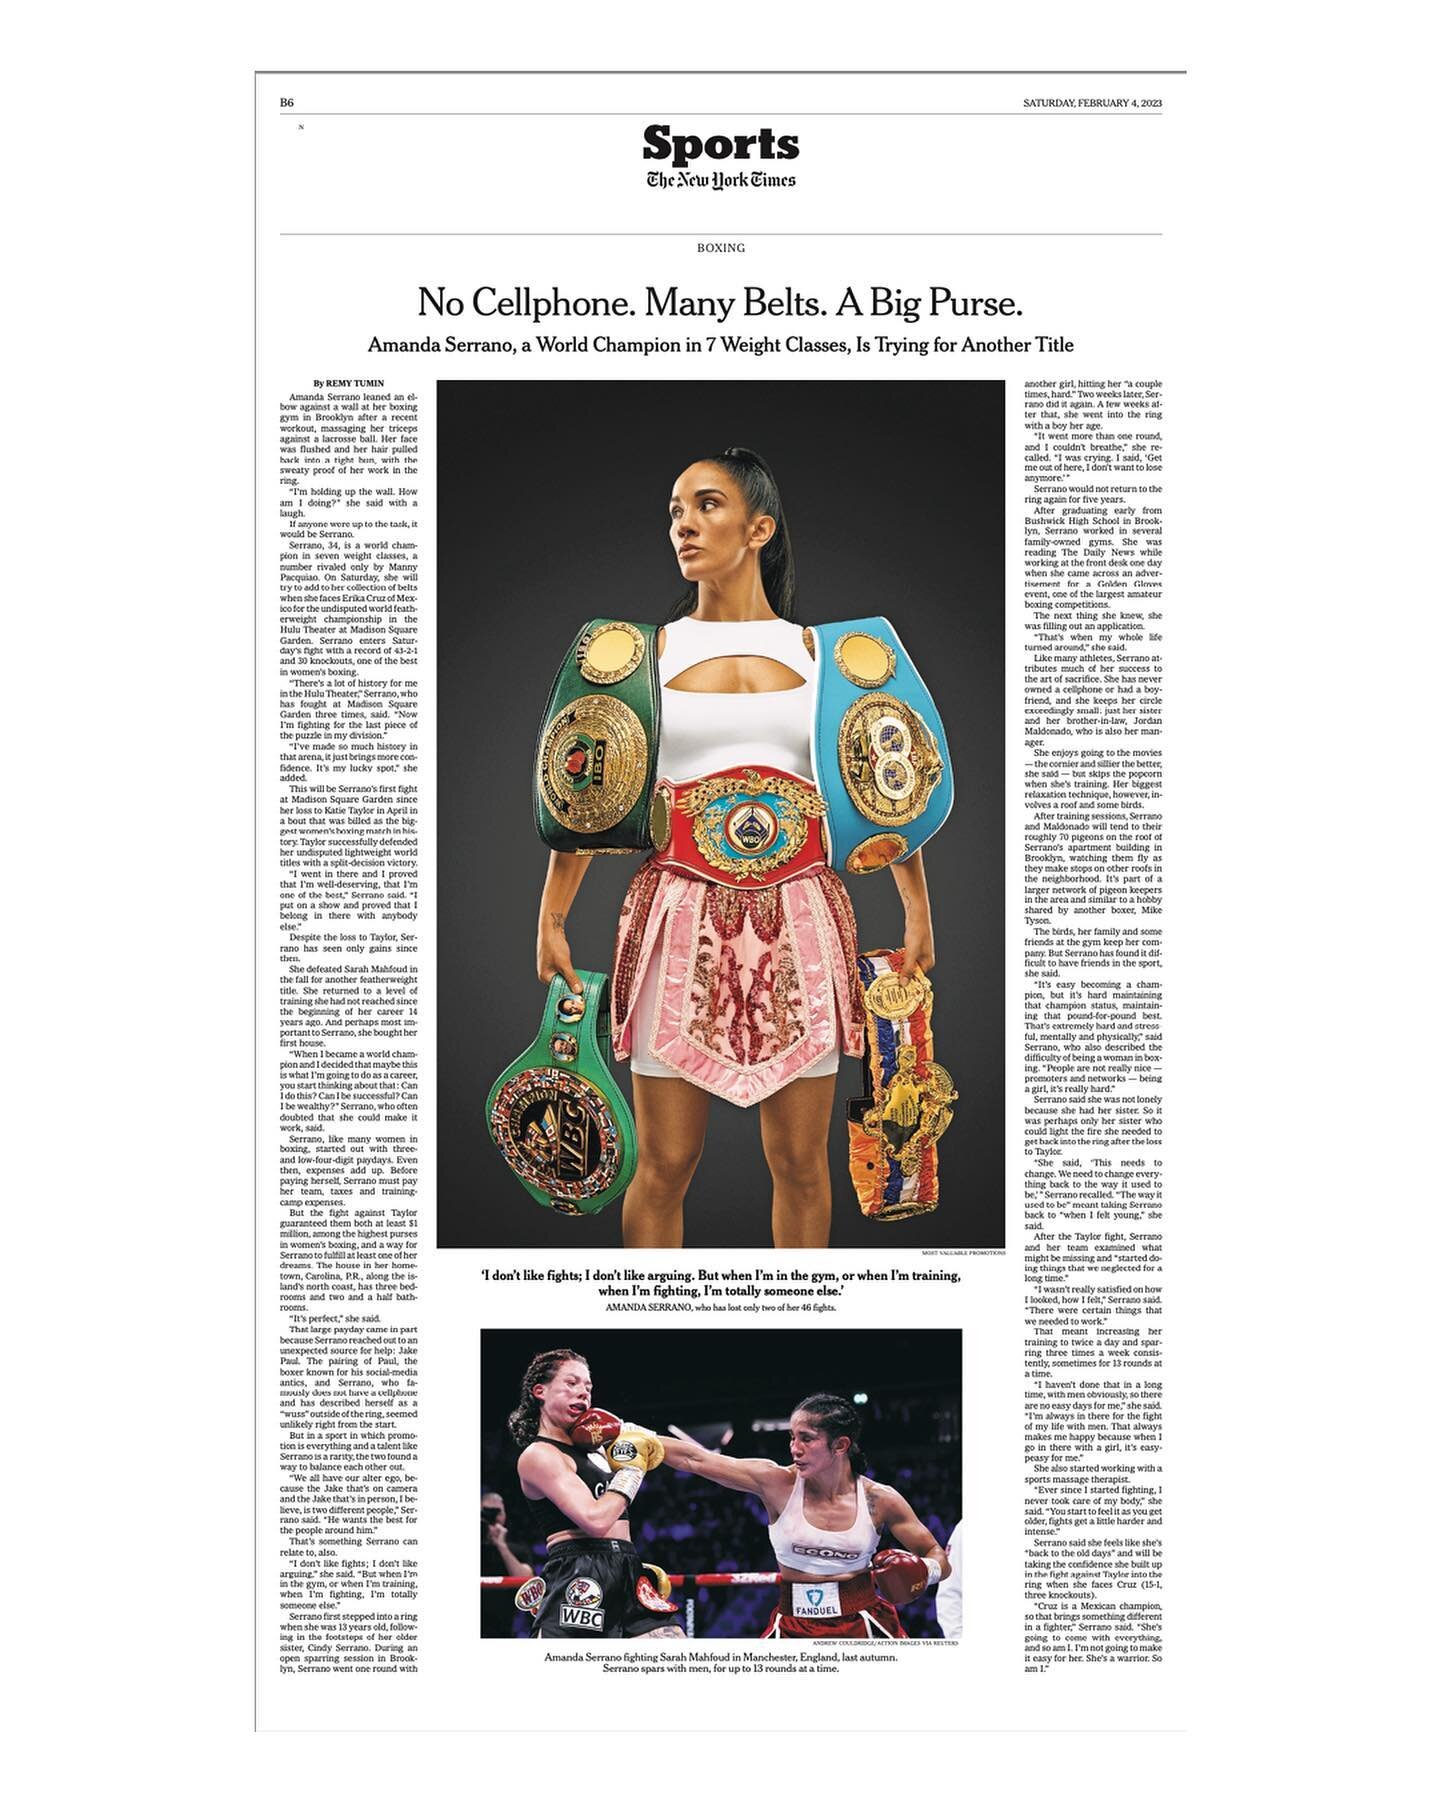 New work for @serranosisters Amanda Serrano - undisputed feather weight champion - featured in 02/04/23 @nytimes ! @mostvaluablepromotions